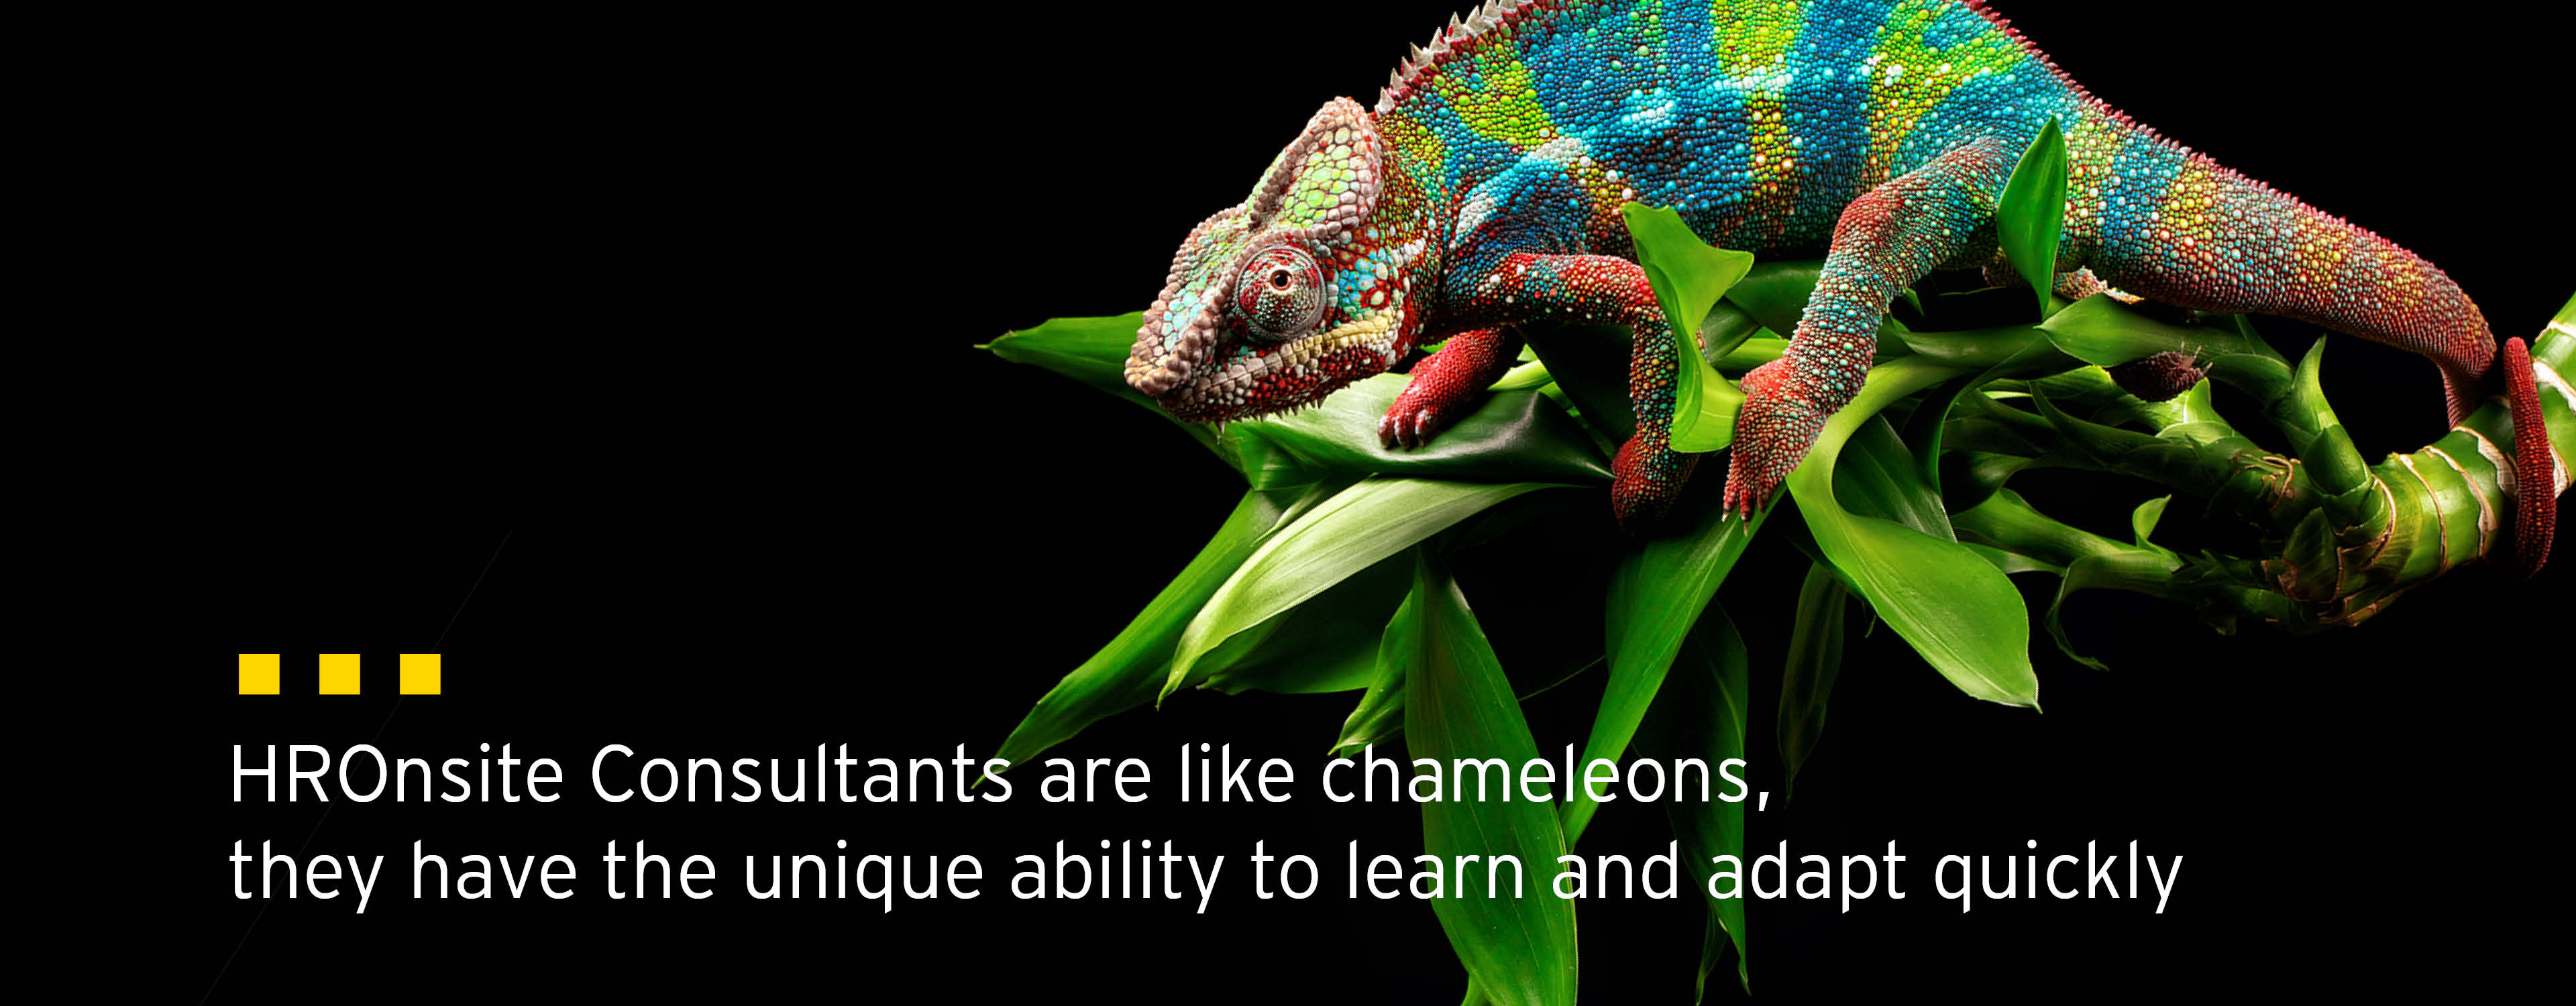 Image with chameleon